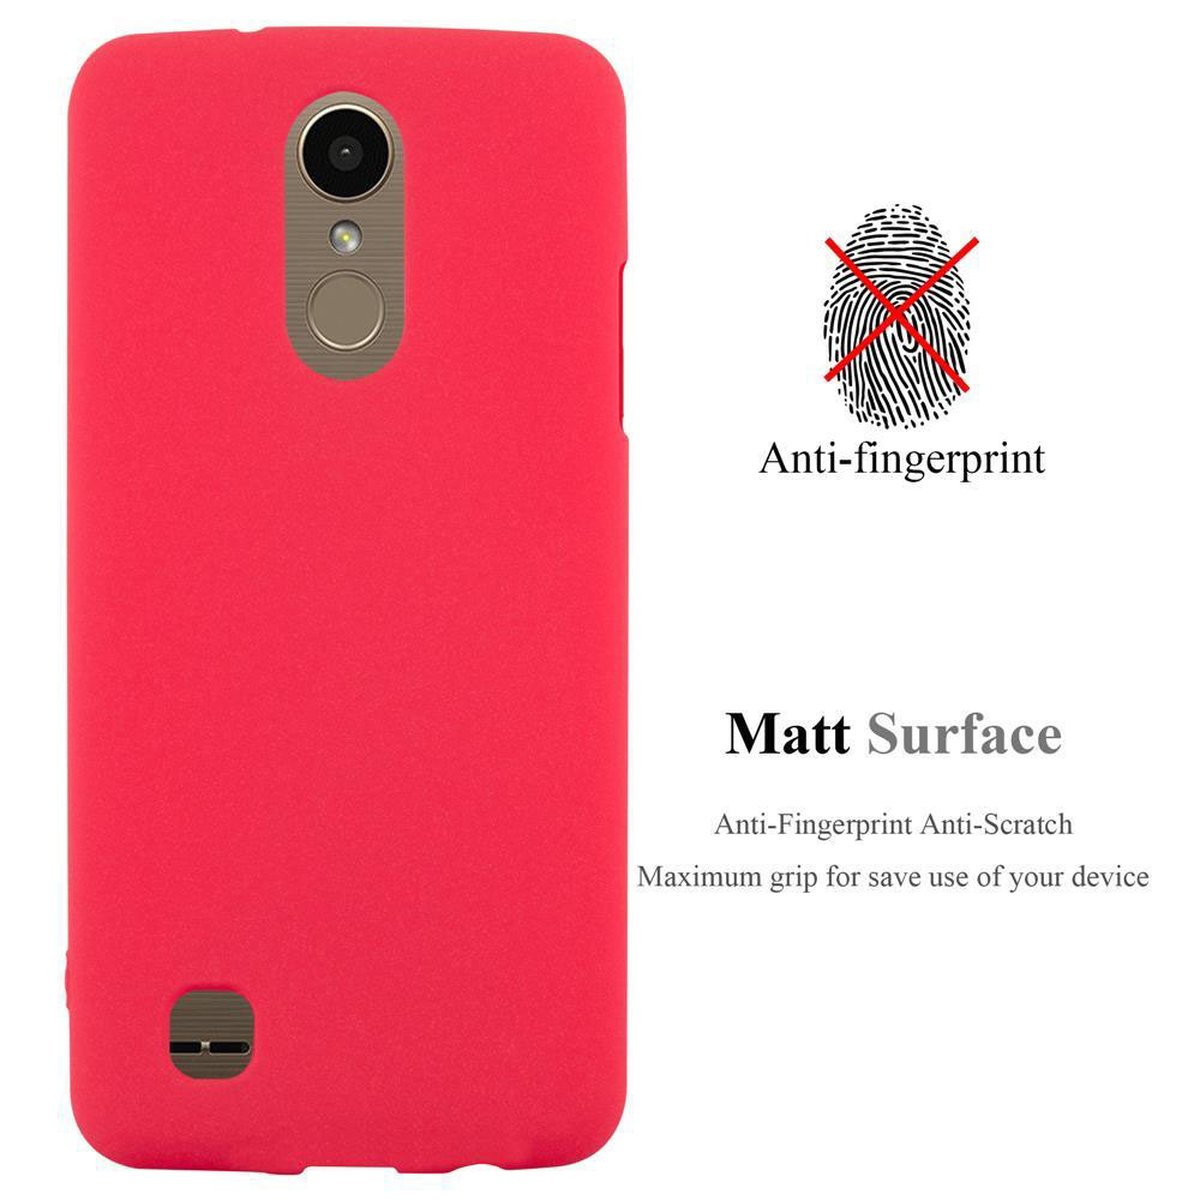 CADORABO TPU LG, 2017, ROT Backcover, FROST Schutzhülle, K10 Frosted